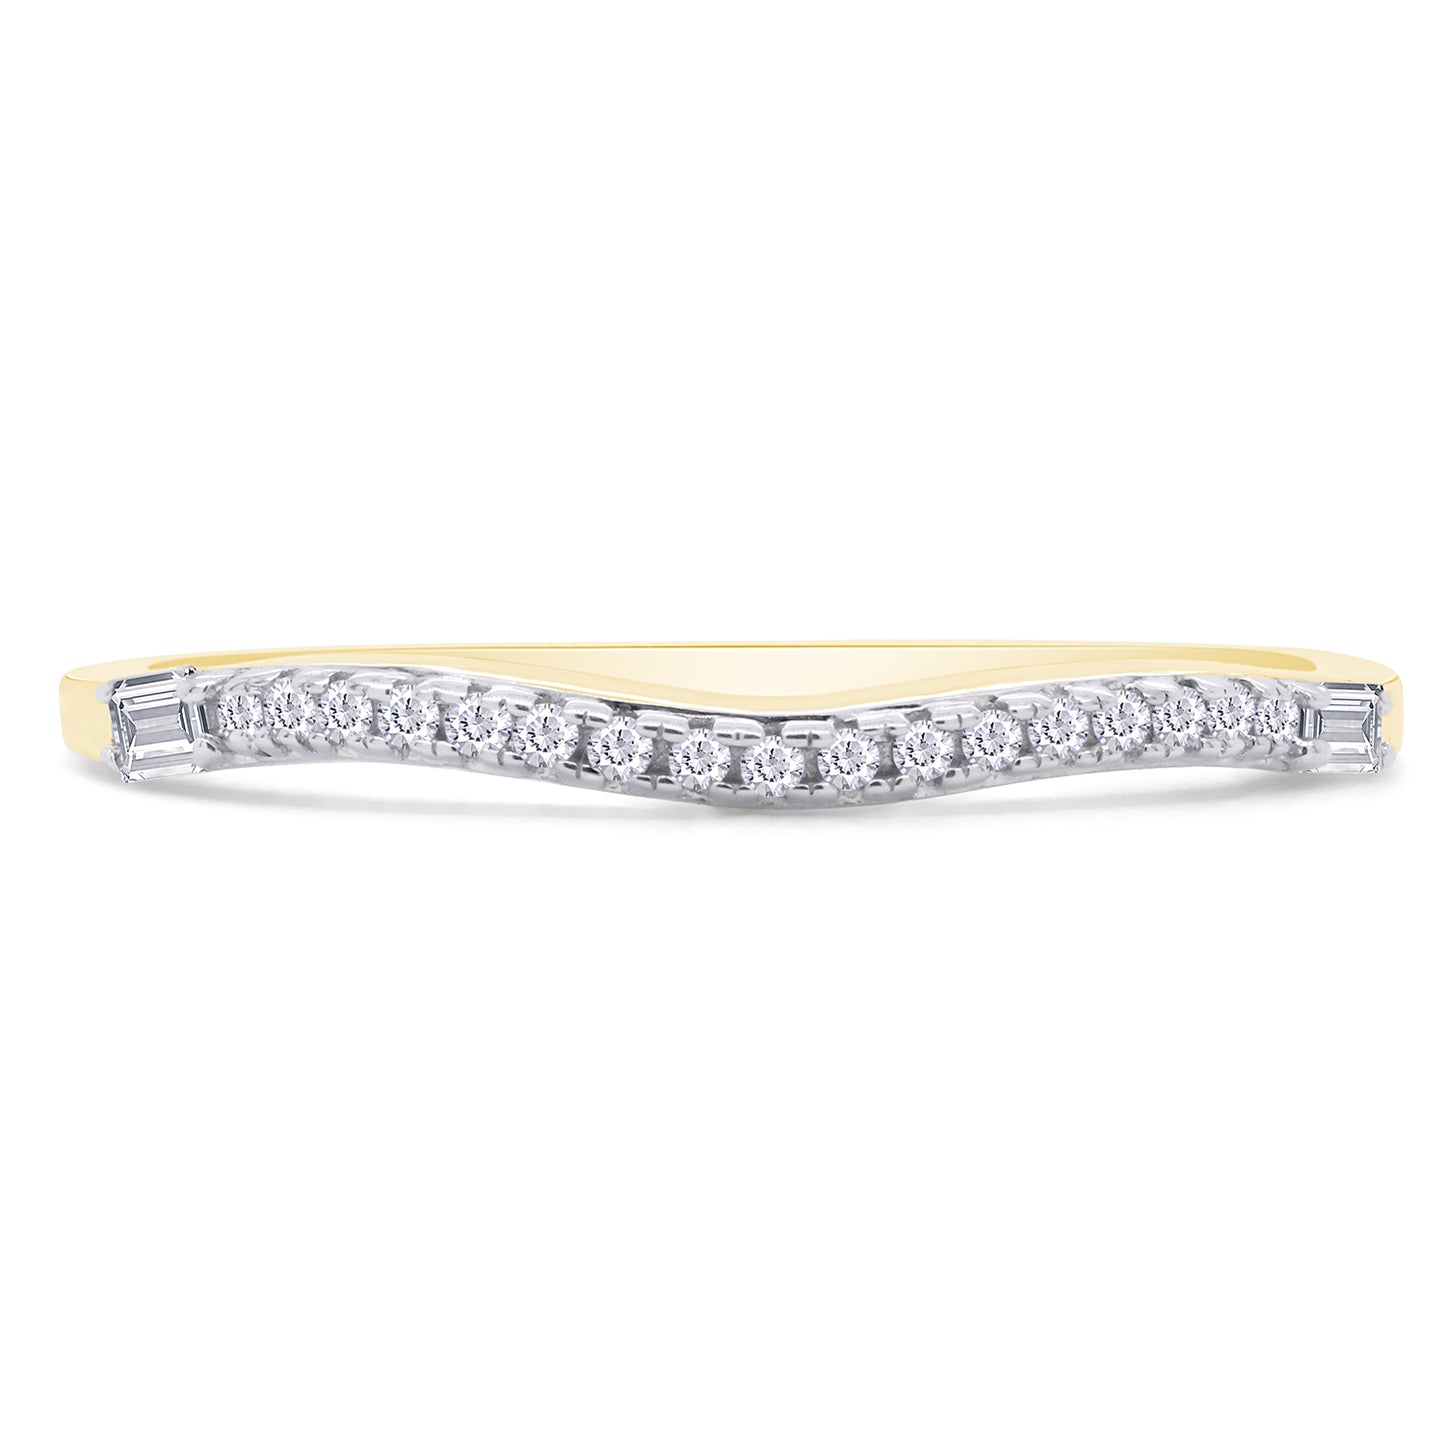 1/10 Carat Baguette & Round Cut White Natural Diamond Curved Enhancer Guard Band Ring In 925 Sterling Silver